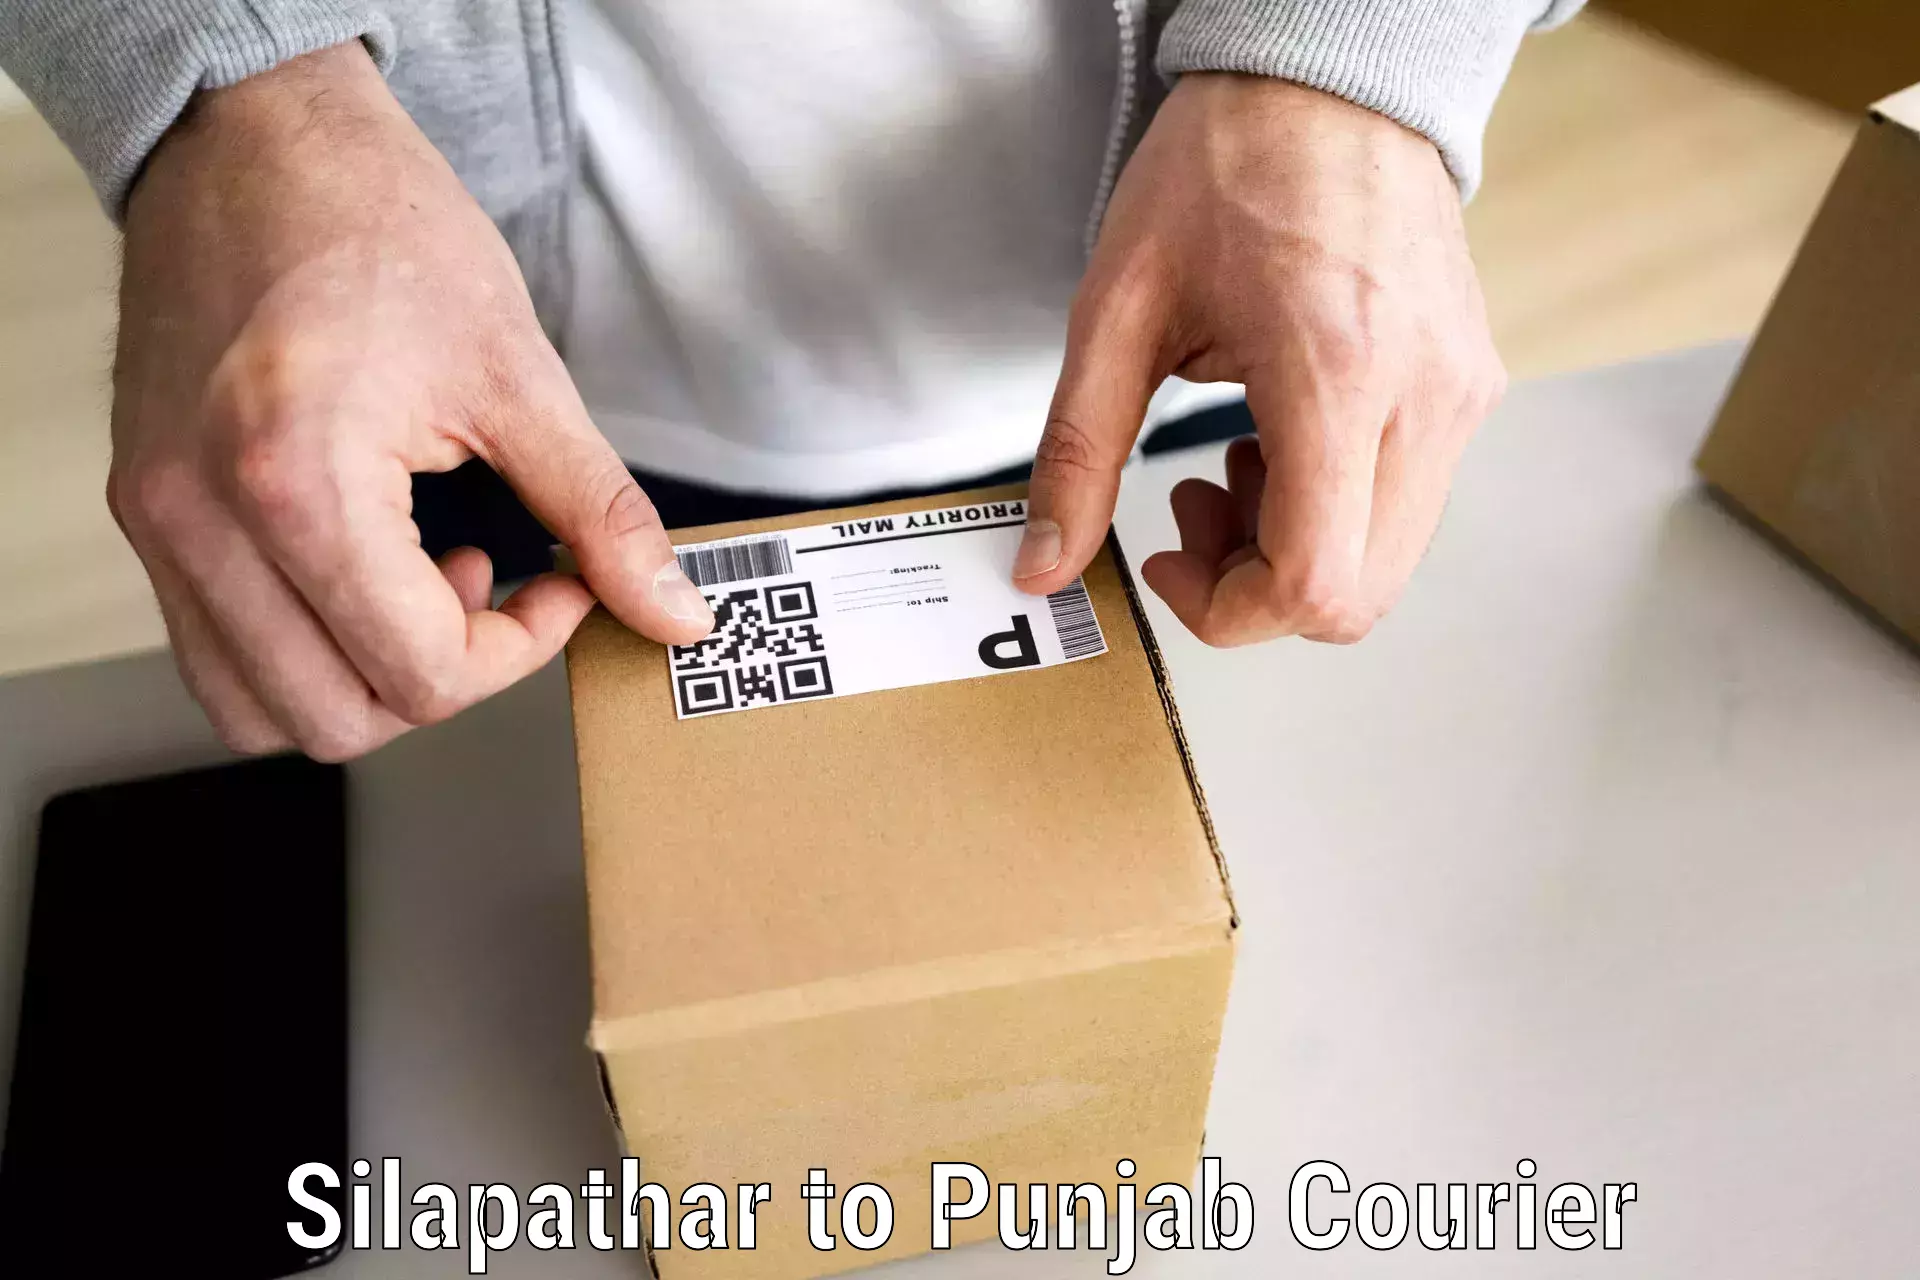 Expert household movers Silapathar to Central University of Punjab Bathinda